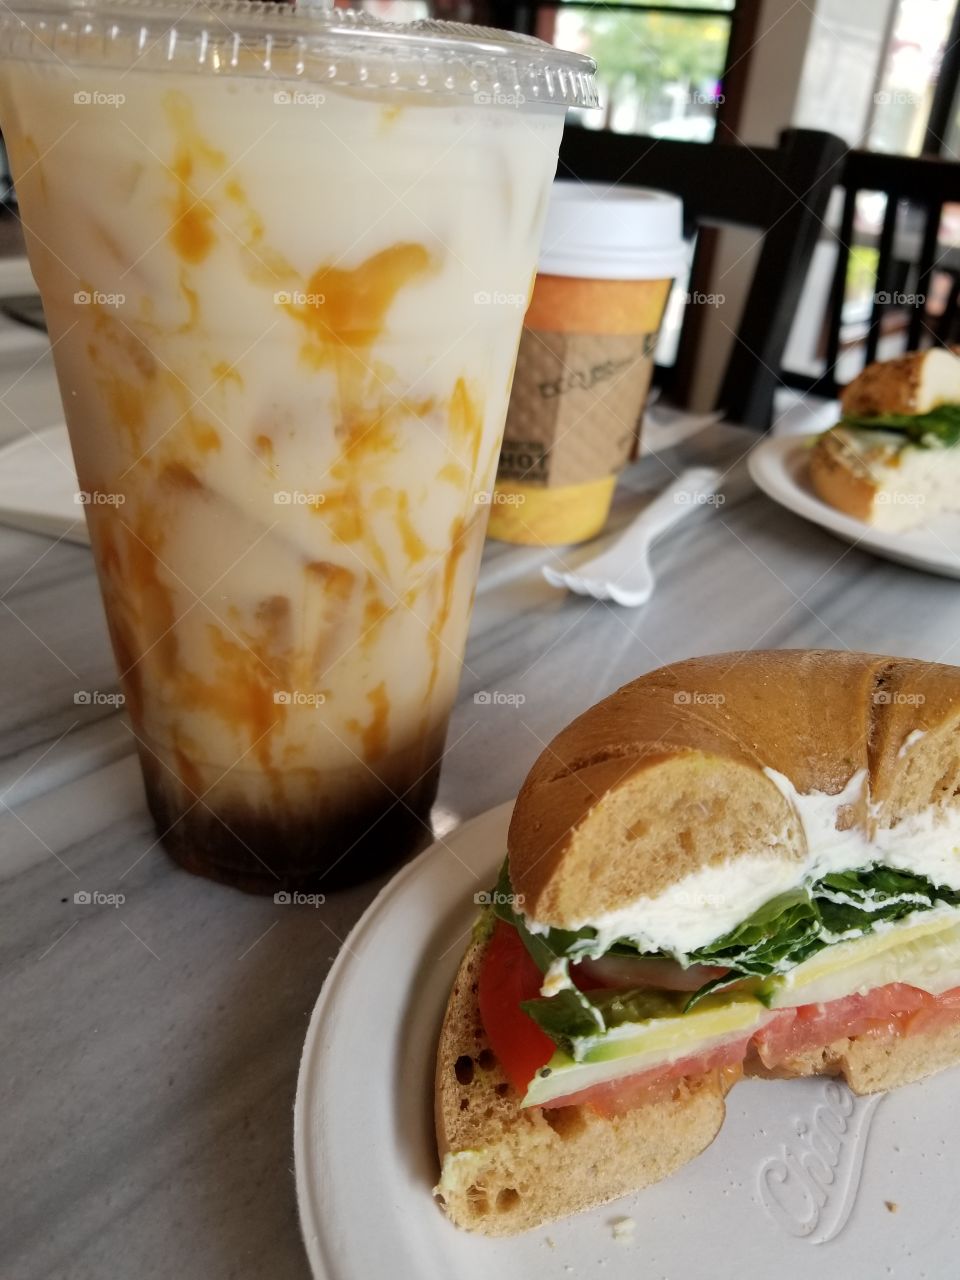 Gotta love those lunches with the fam. Especially when those lunches involve caramel macchiatos and bagels with vegetables and cream cheese!